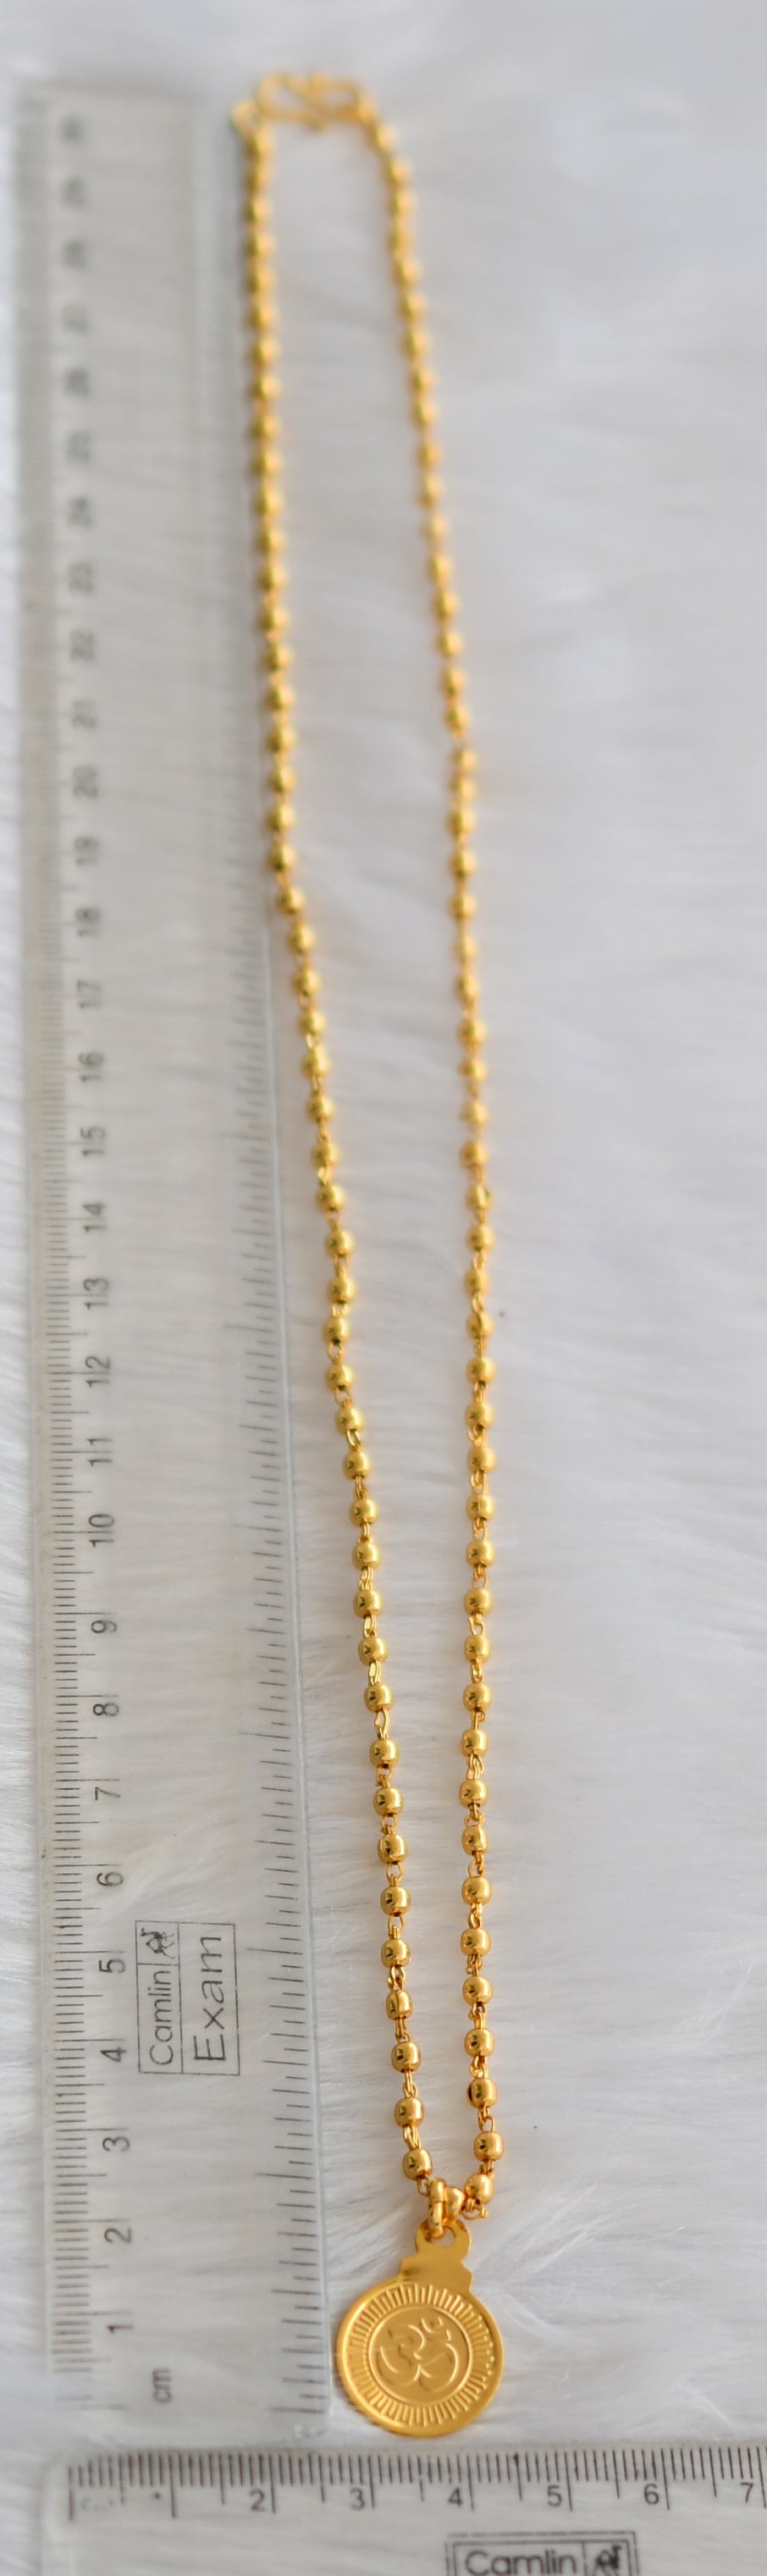 Gorgeous Wholesale asian gold jewellery For A Good Bargain - Alibaba.com